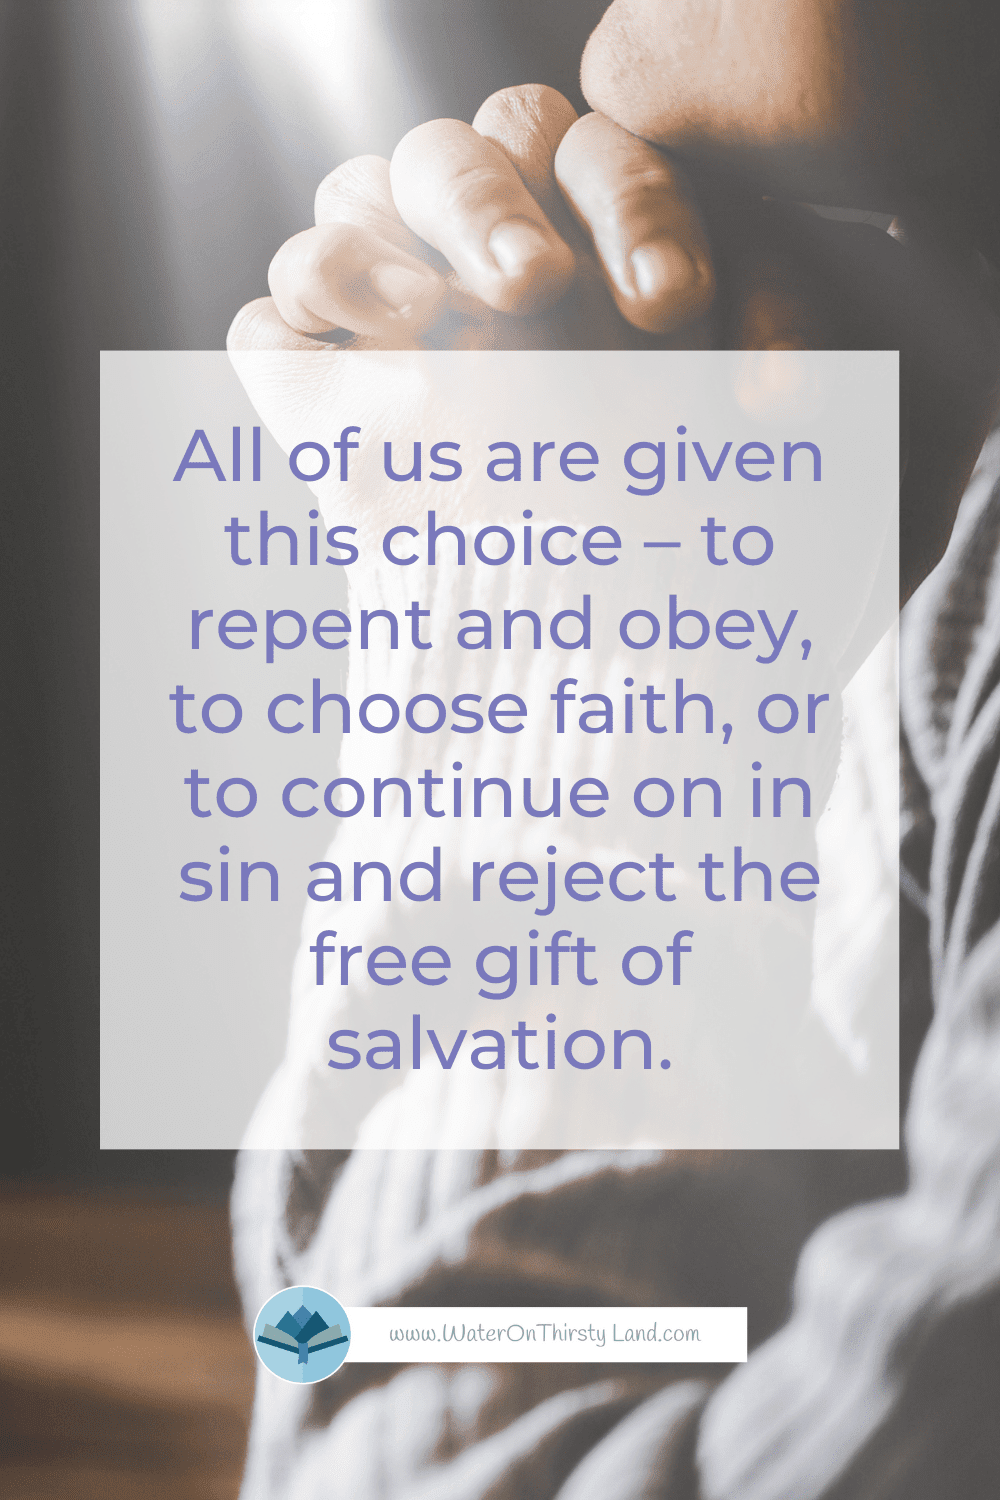 All of us have a choice to obey or stay in sin